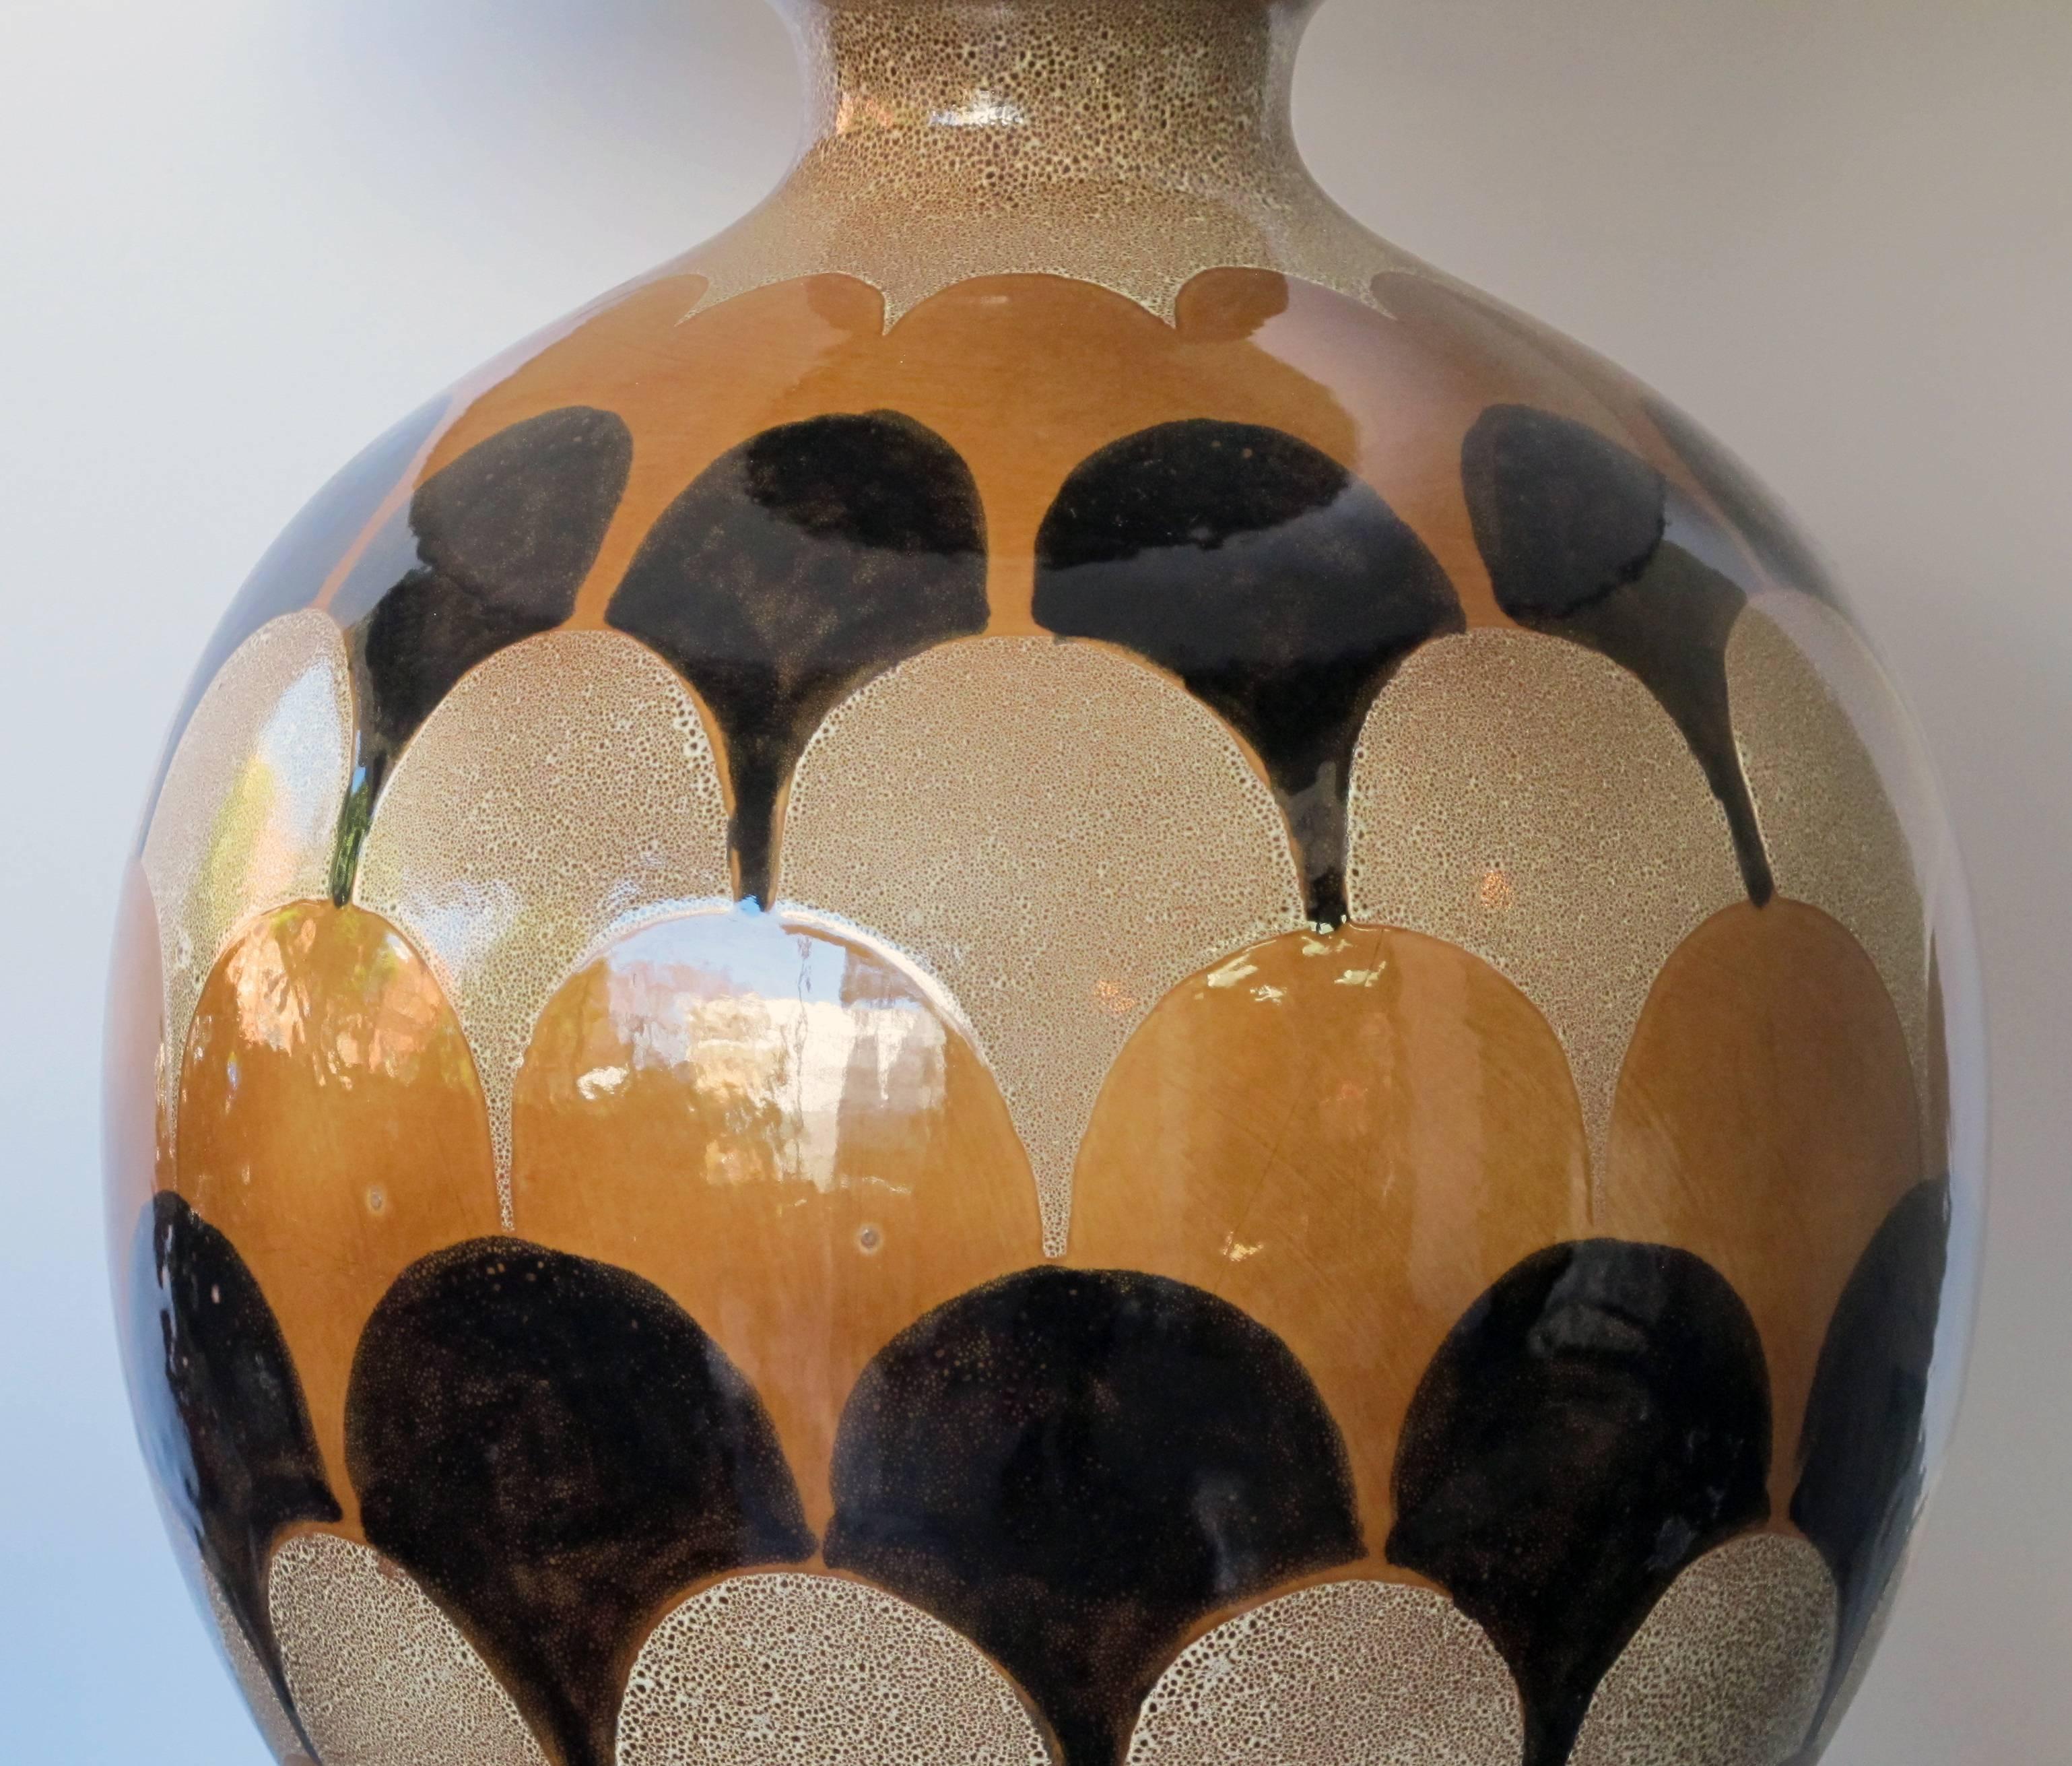 A bold pair of Italian 1970s handmade ovoid-shaped ceramic lamps with imbricating glaze; each large lamp glazed in an overlapping glaze in muted tones of ivory, russet and black.